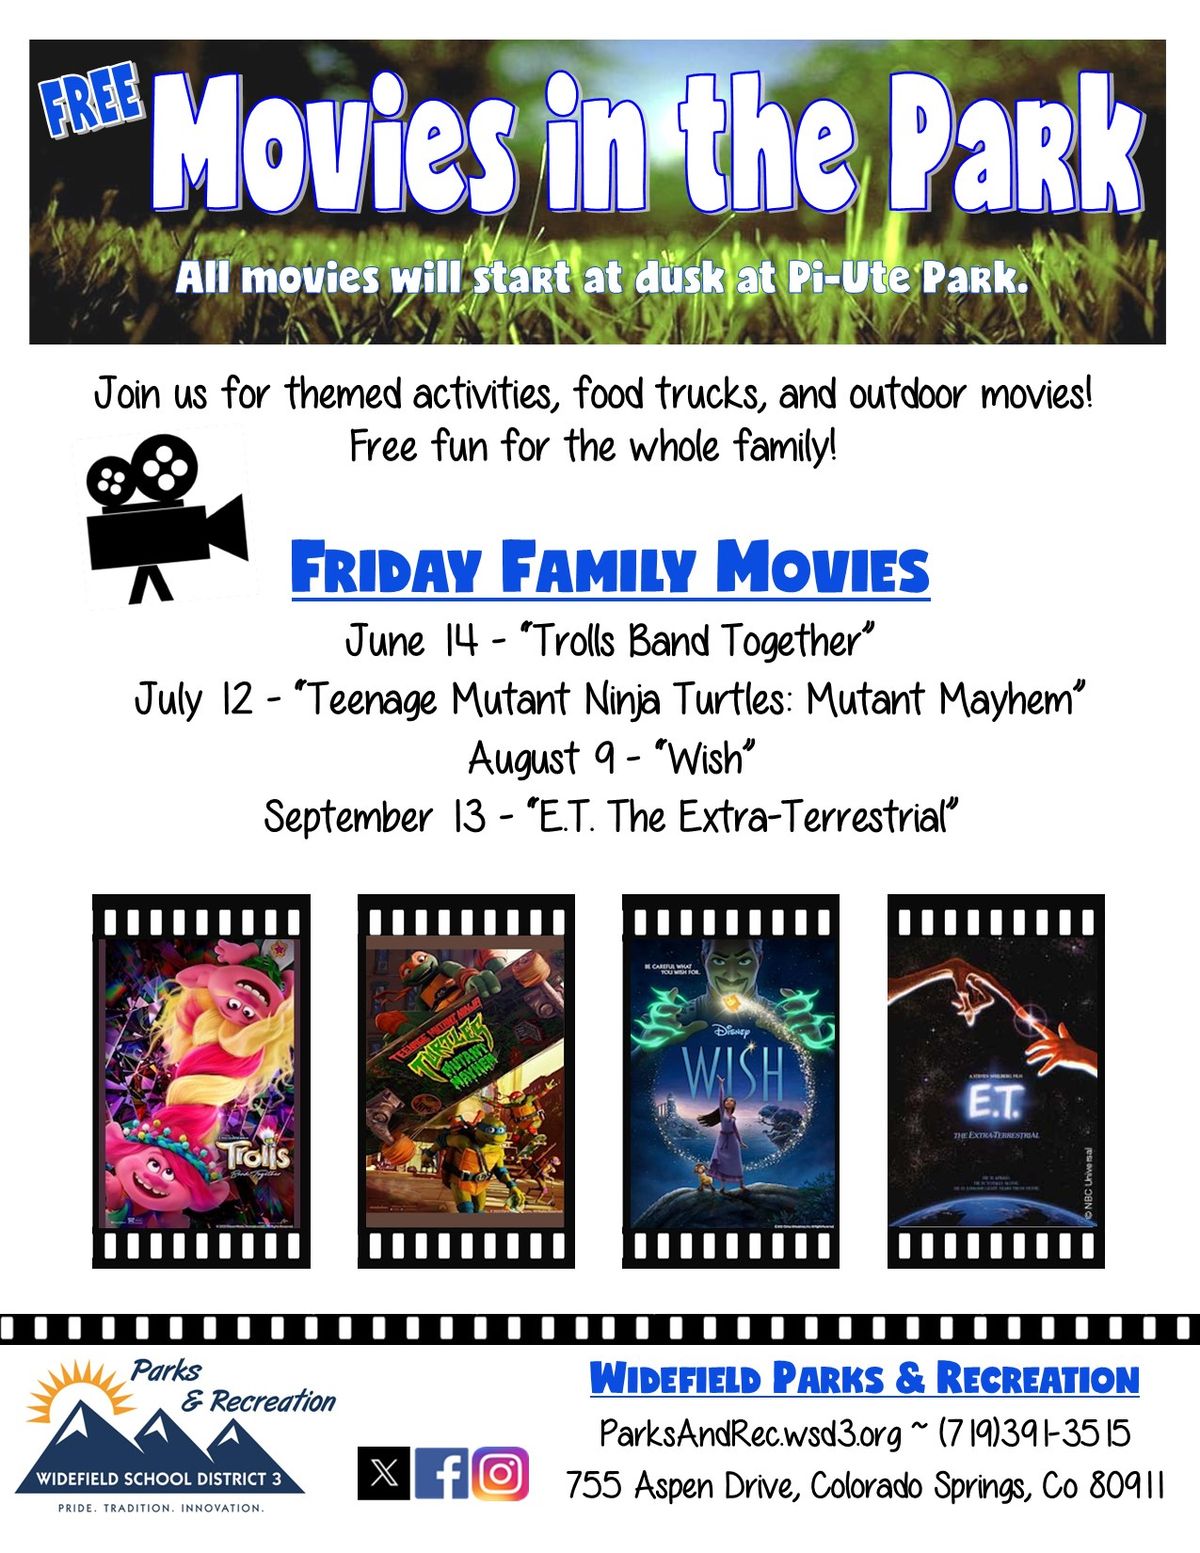 Movie In the Park @ Dusk - "Trolls Band Together"